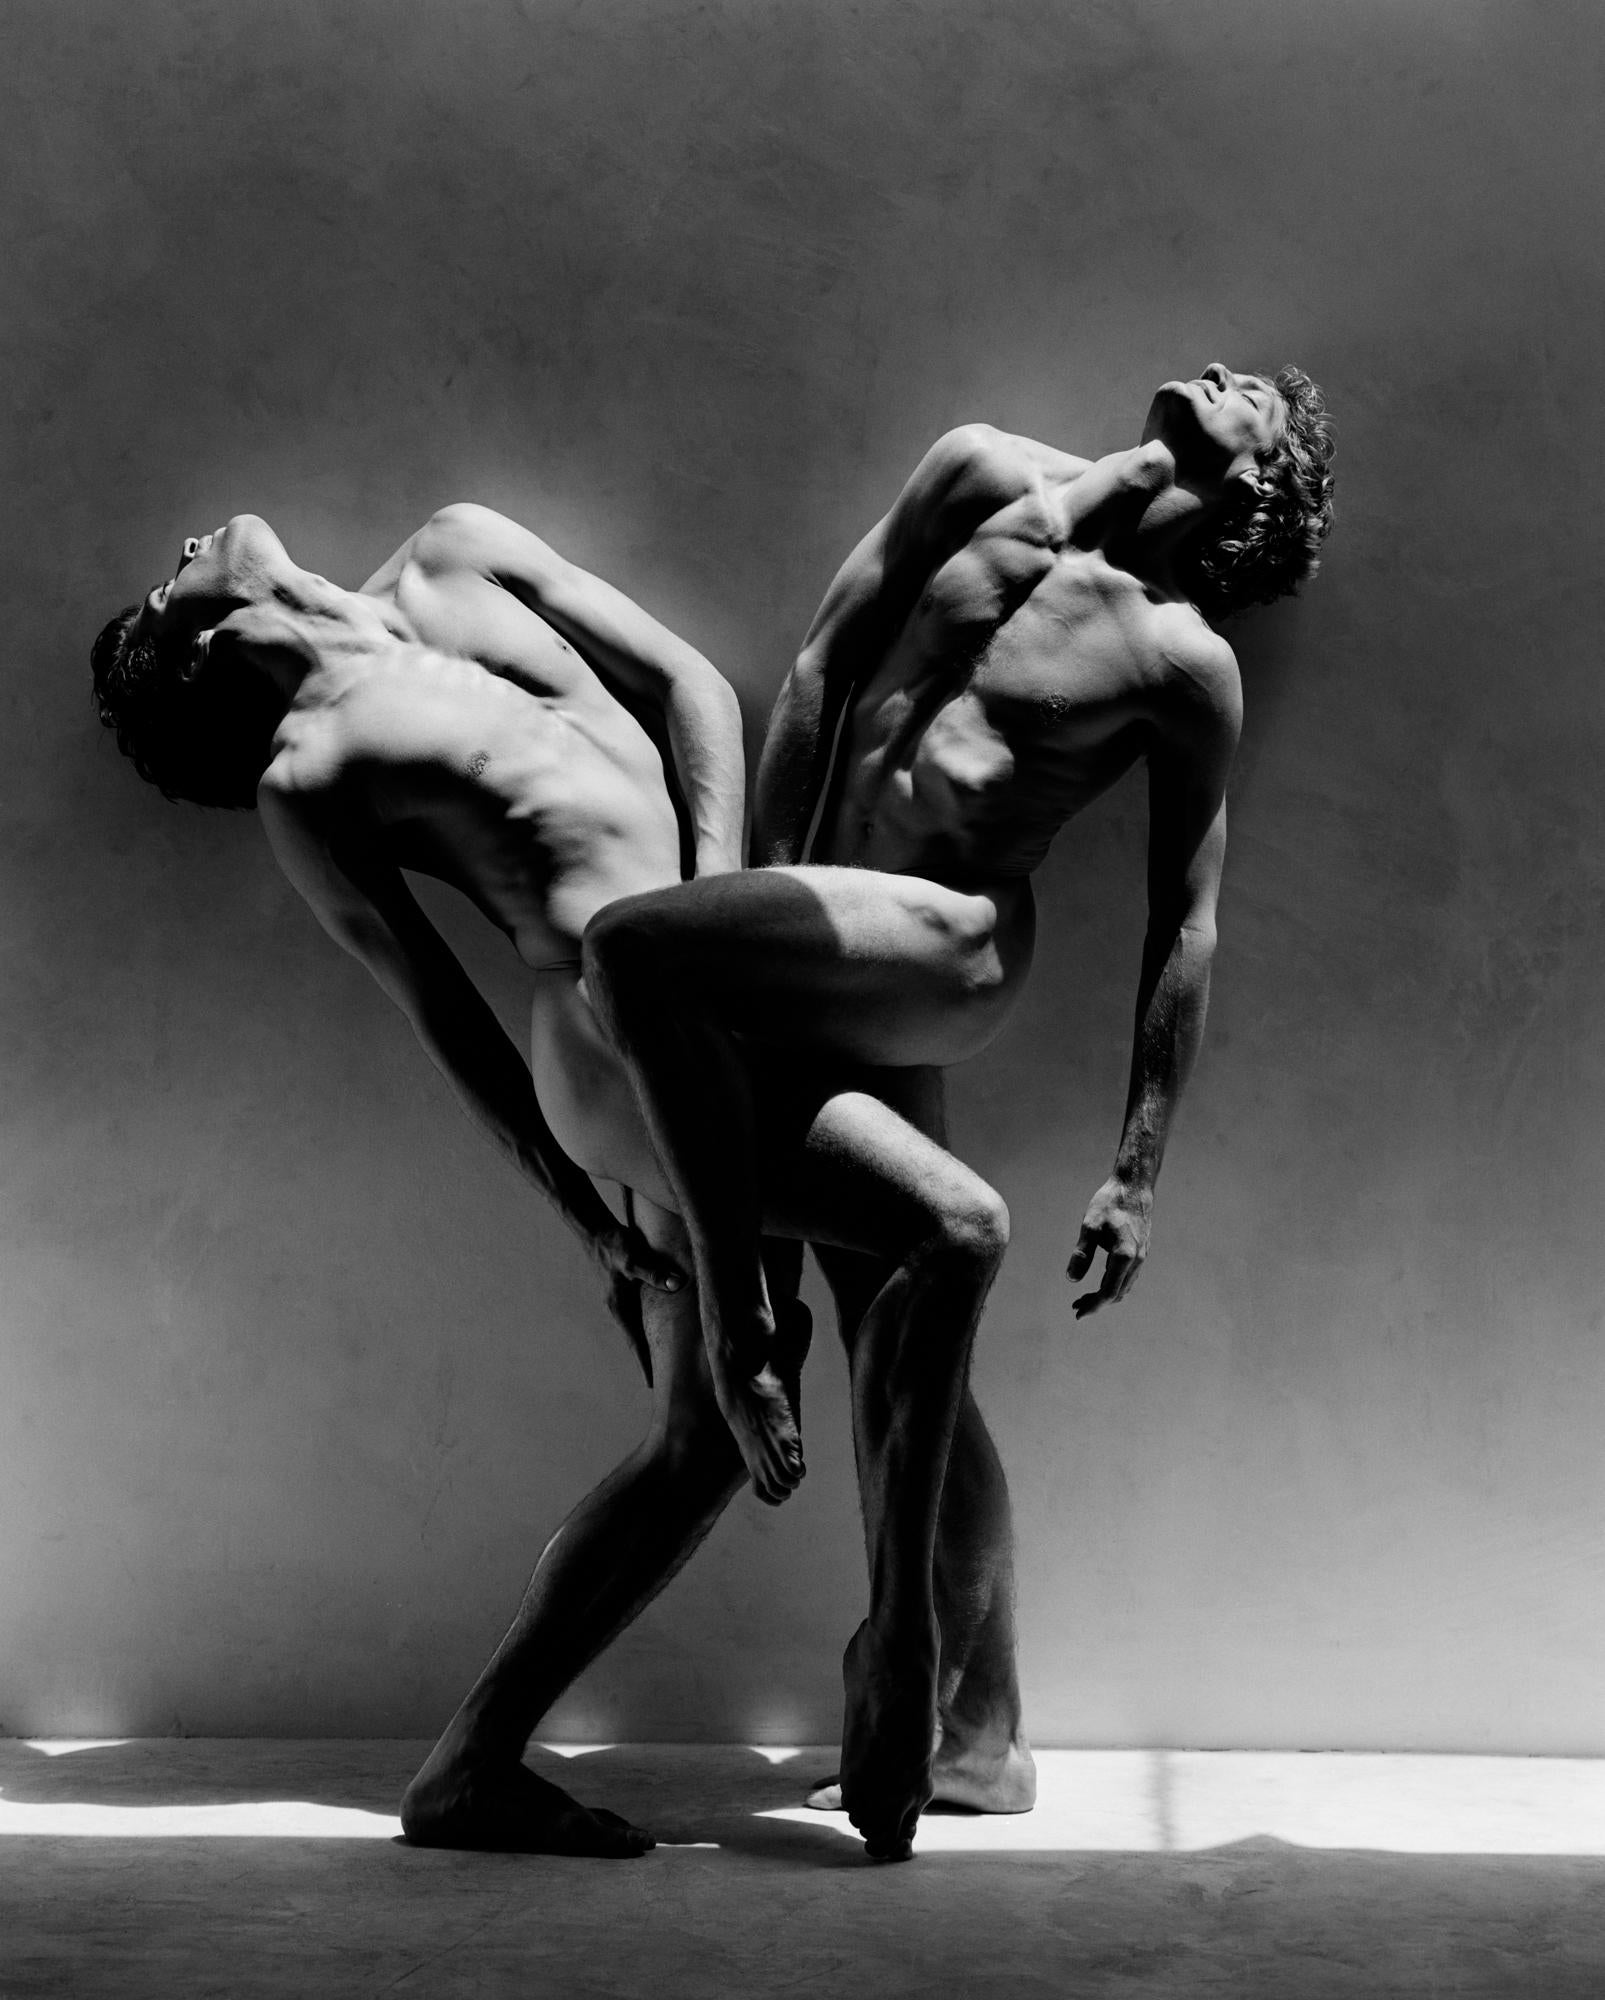 Greg Gorman Nude Photograph - Rex and Gregory, Los Angeles, 21st Century, Contemporary, Celebrity, Photography